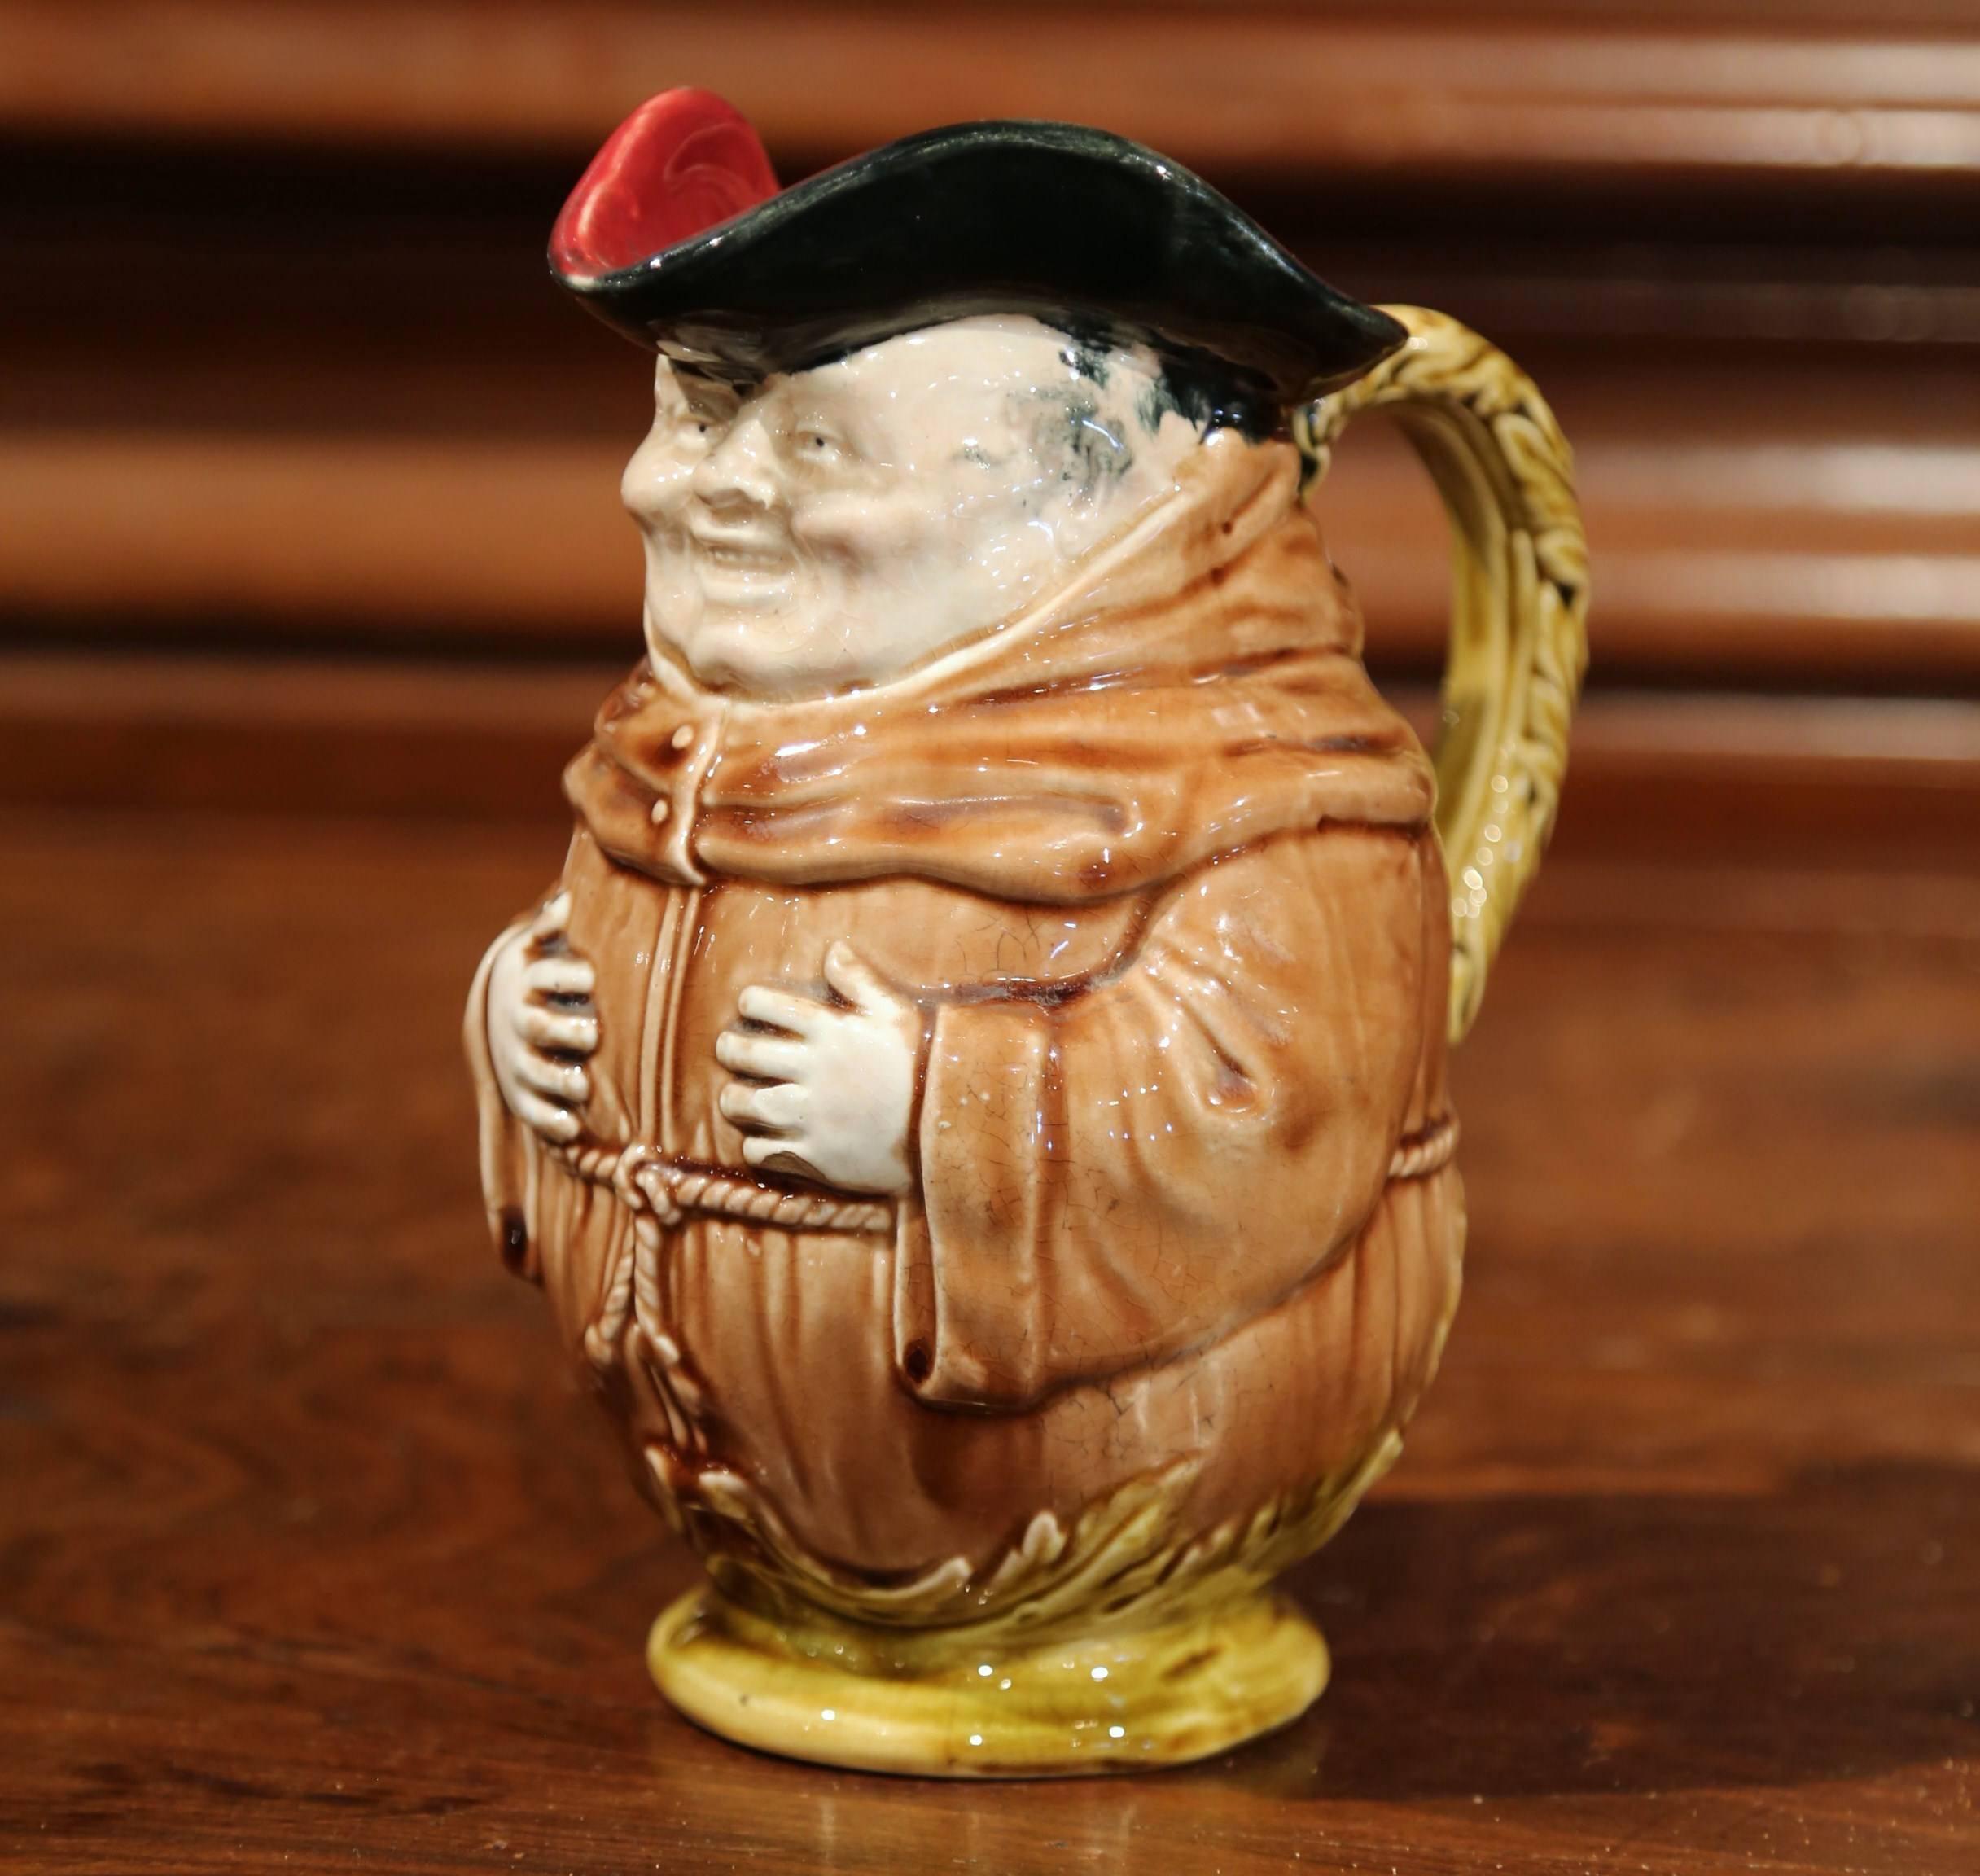 19th Century French Hand Painted Ceramic Barbotine Monk Pitcher by Onnaing (Handgefertigt)